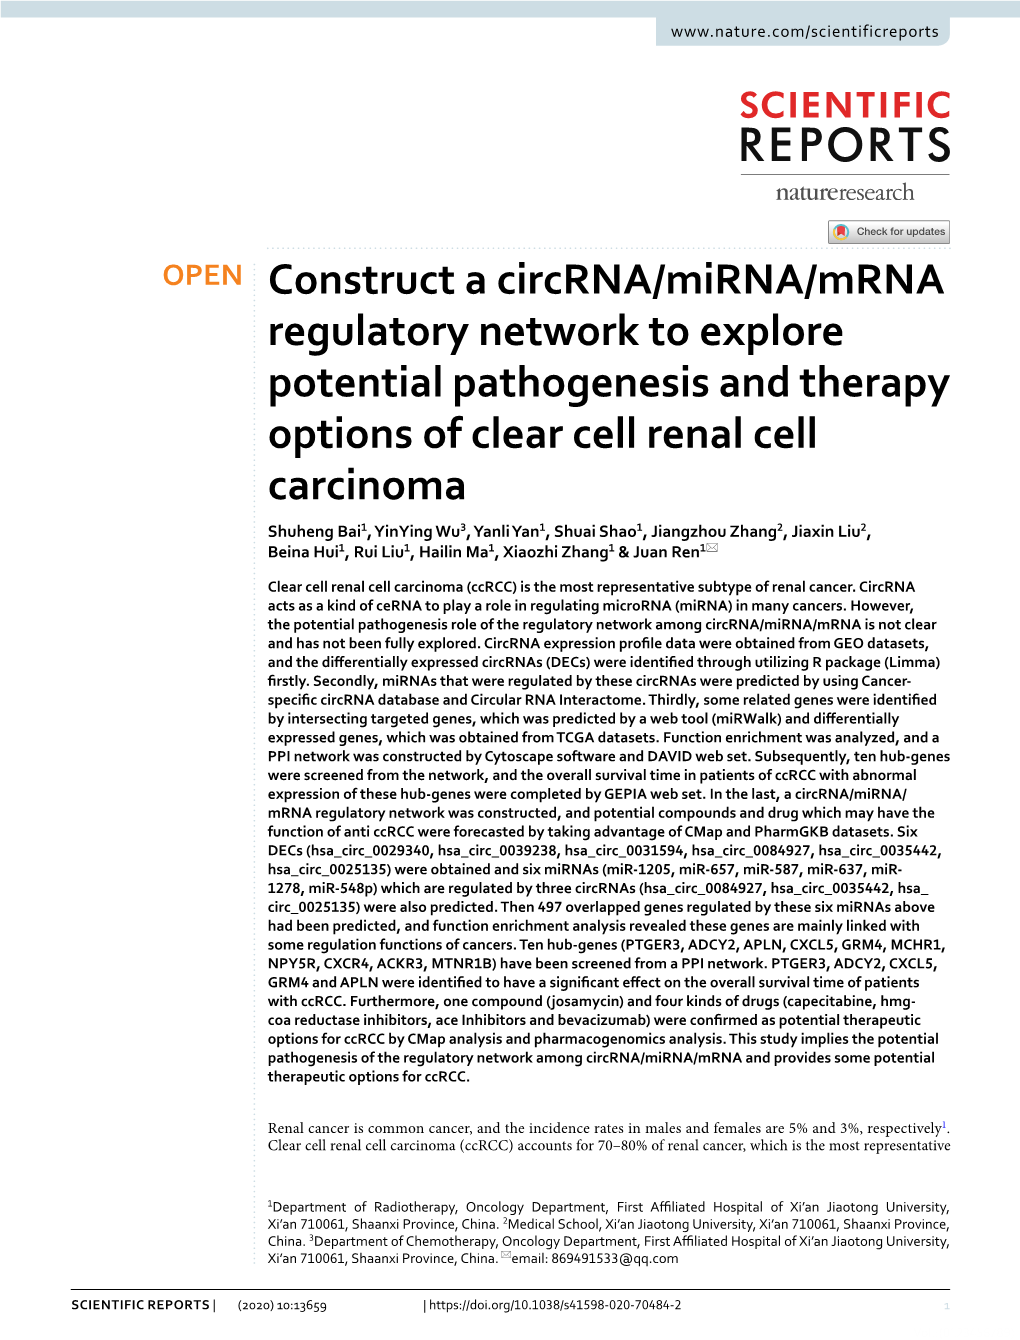 Construct a Circrna/Mirna/Mrna Regulatory Network to Explore Potential Pathogenesis and Therapy Options of Clear Cell Renal Cell